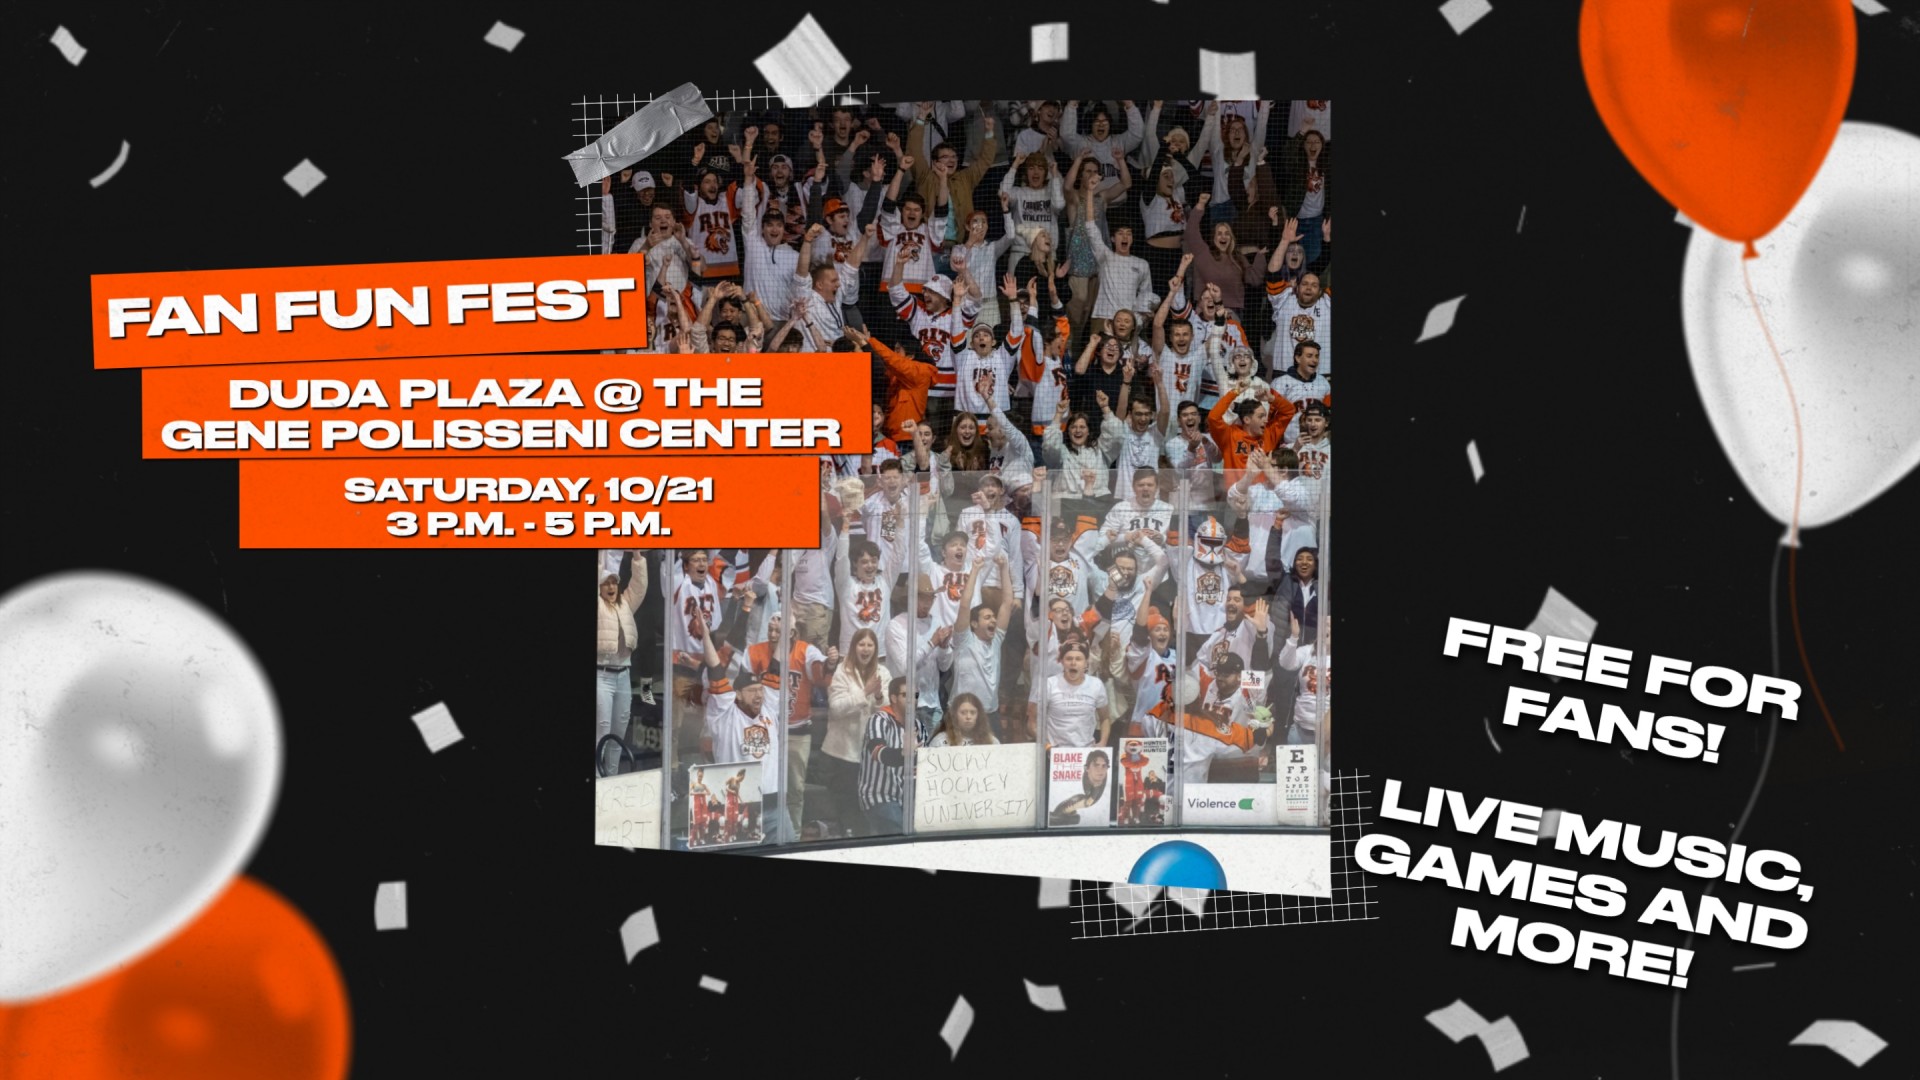 fan fun fest at duda plaza from 3 p.m. - 5 p.m.; fans cheering on black background